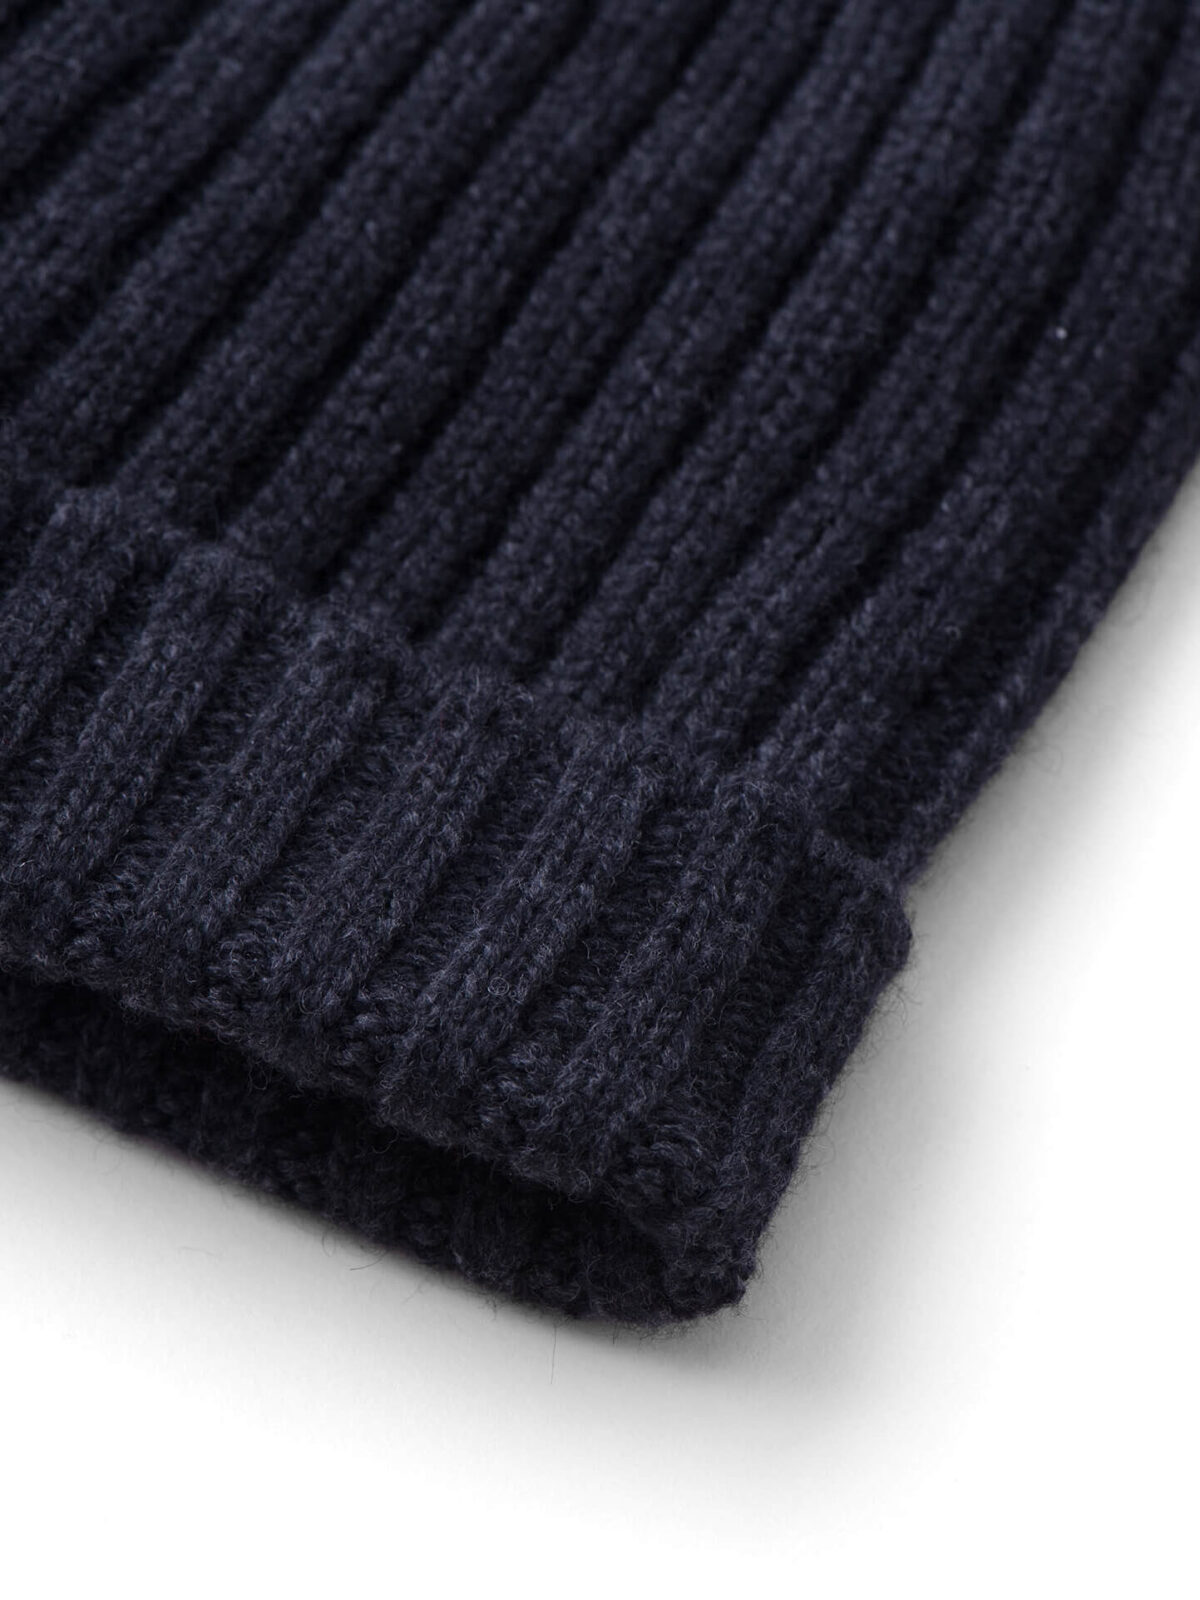 Charcoal Wool and Cashmere Italian Knit Hat